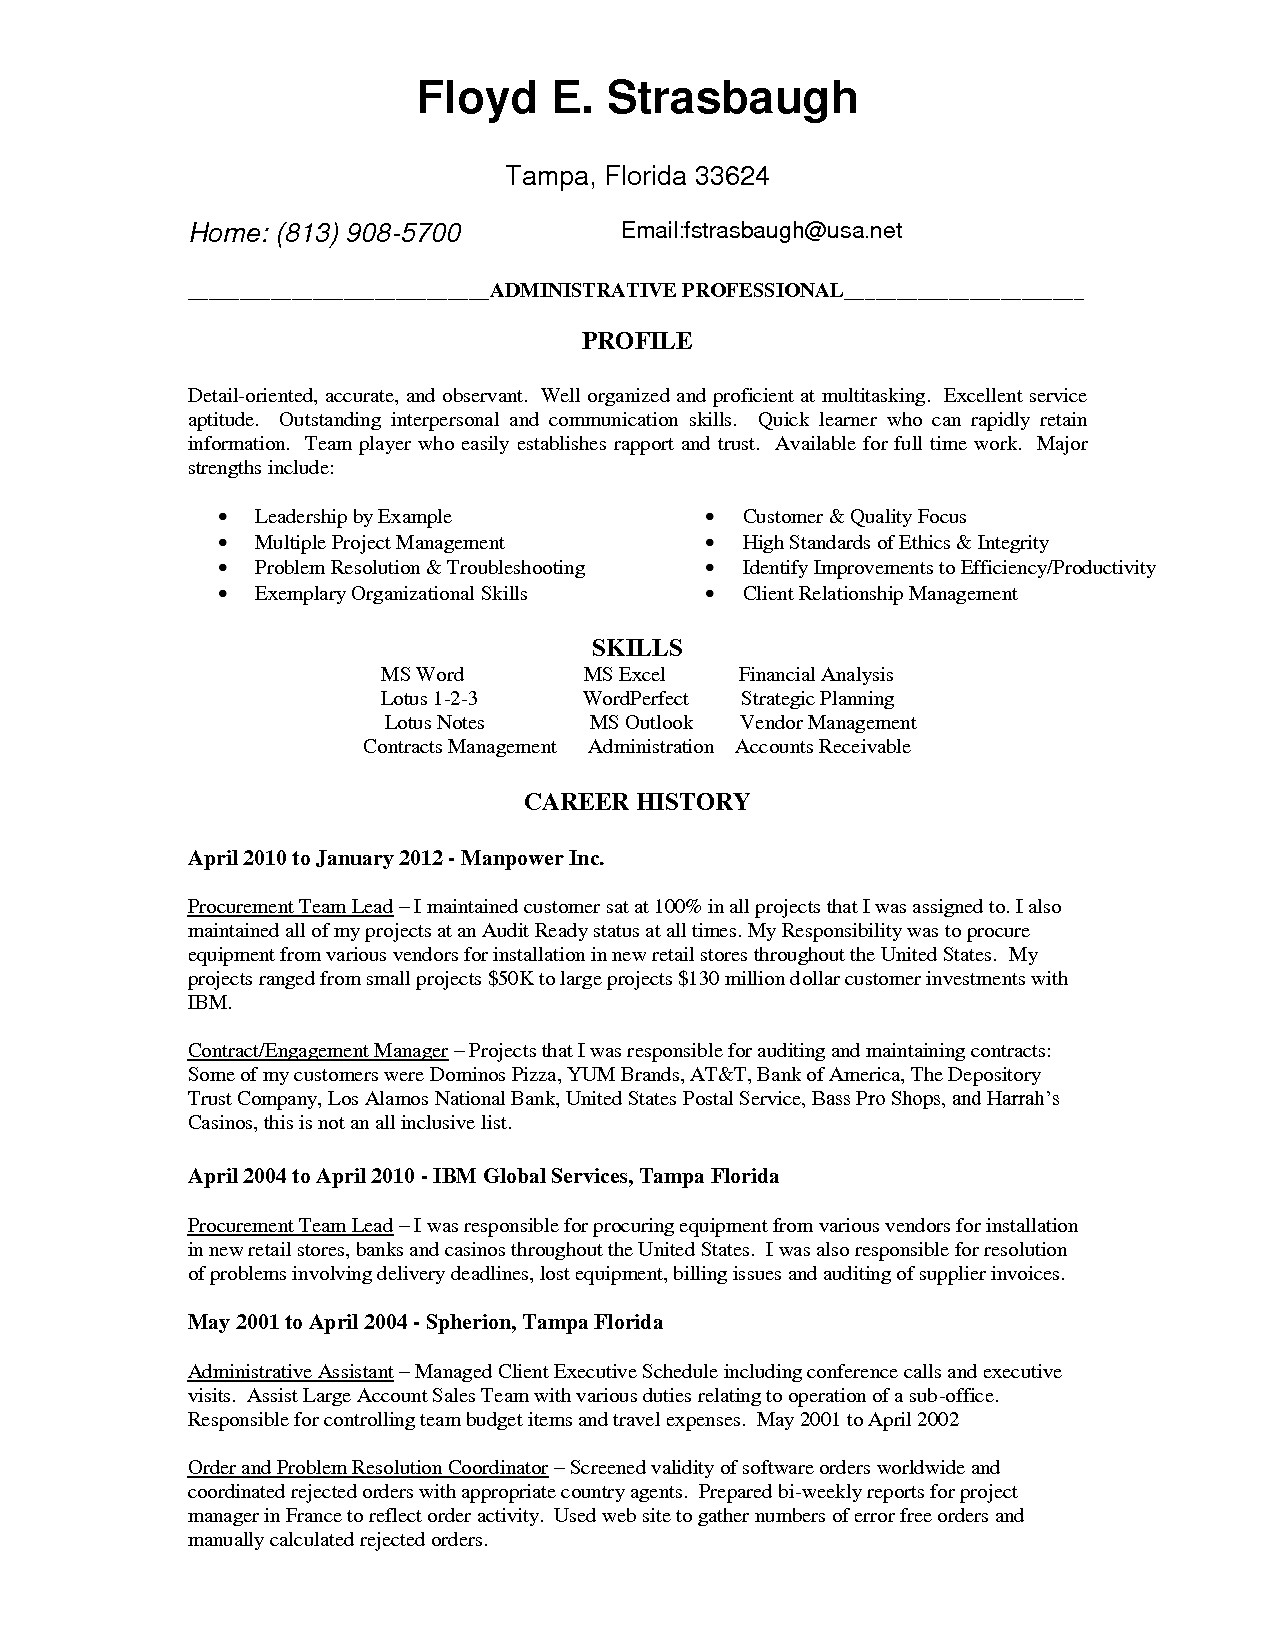 Proposal Cover Letter Template - Business Operating Plan Template Valid Business Cover Letter